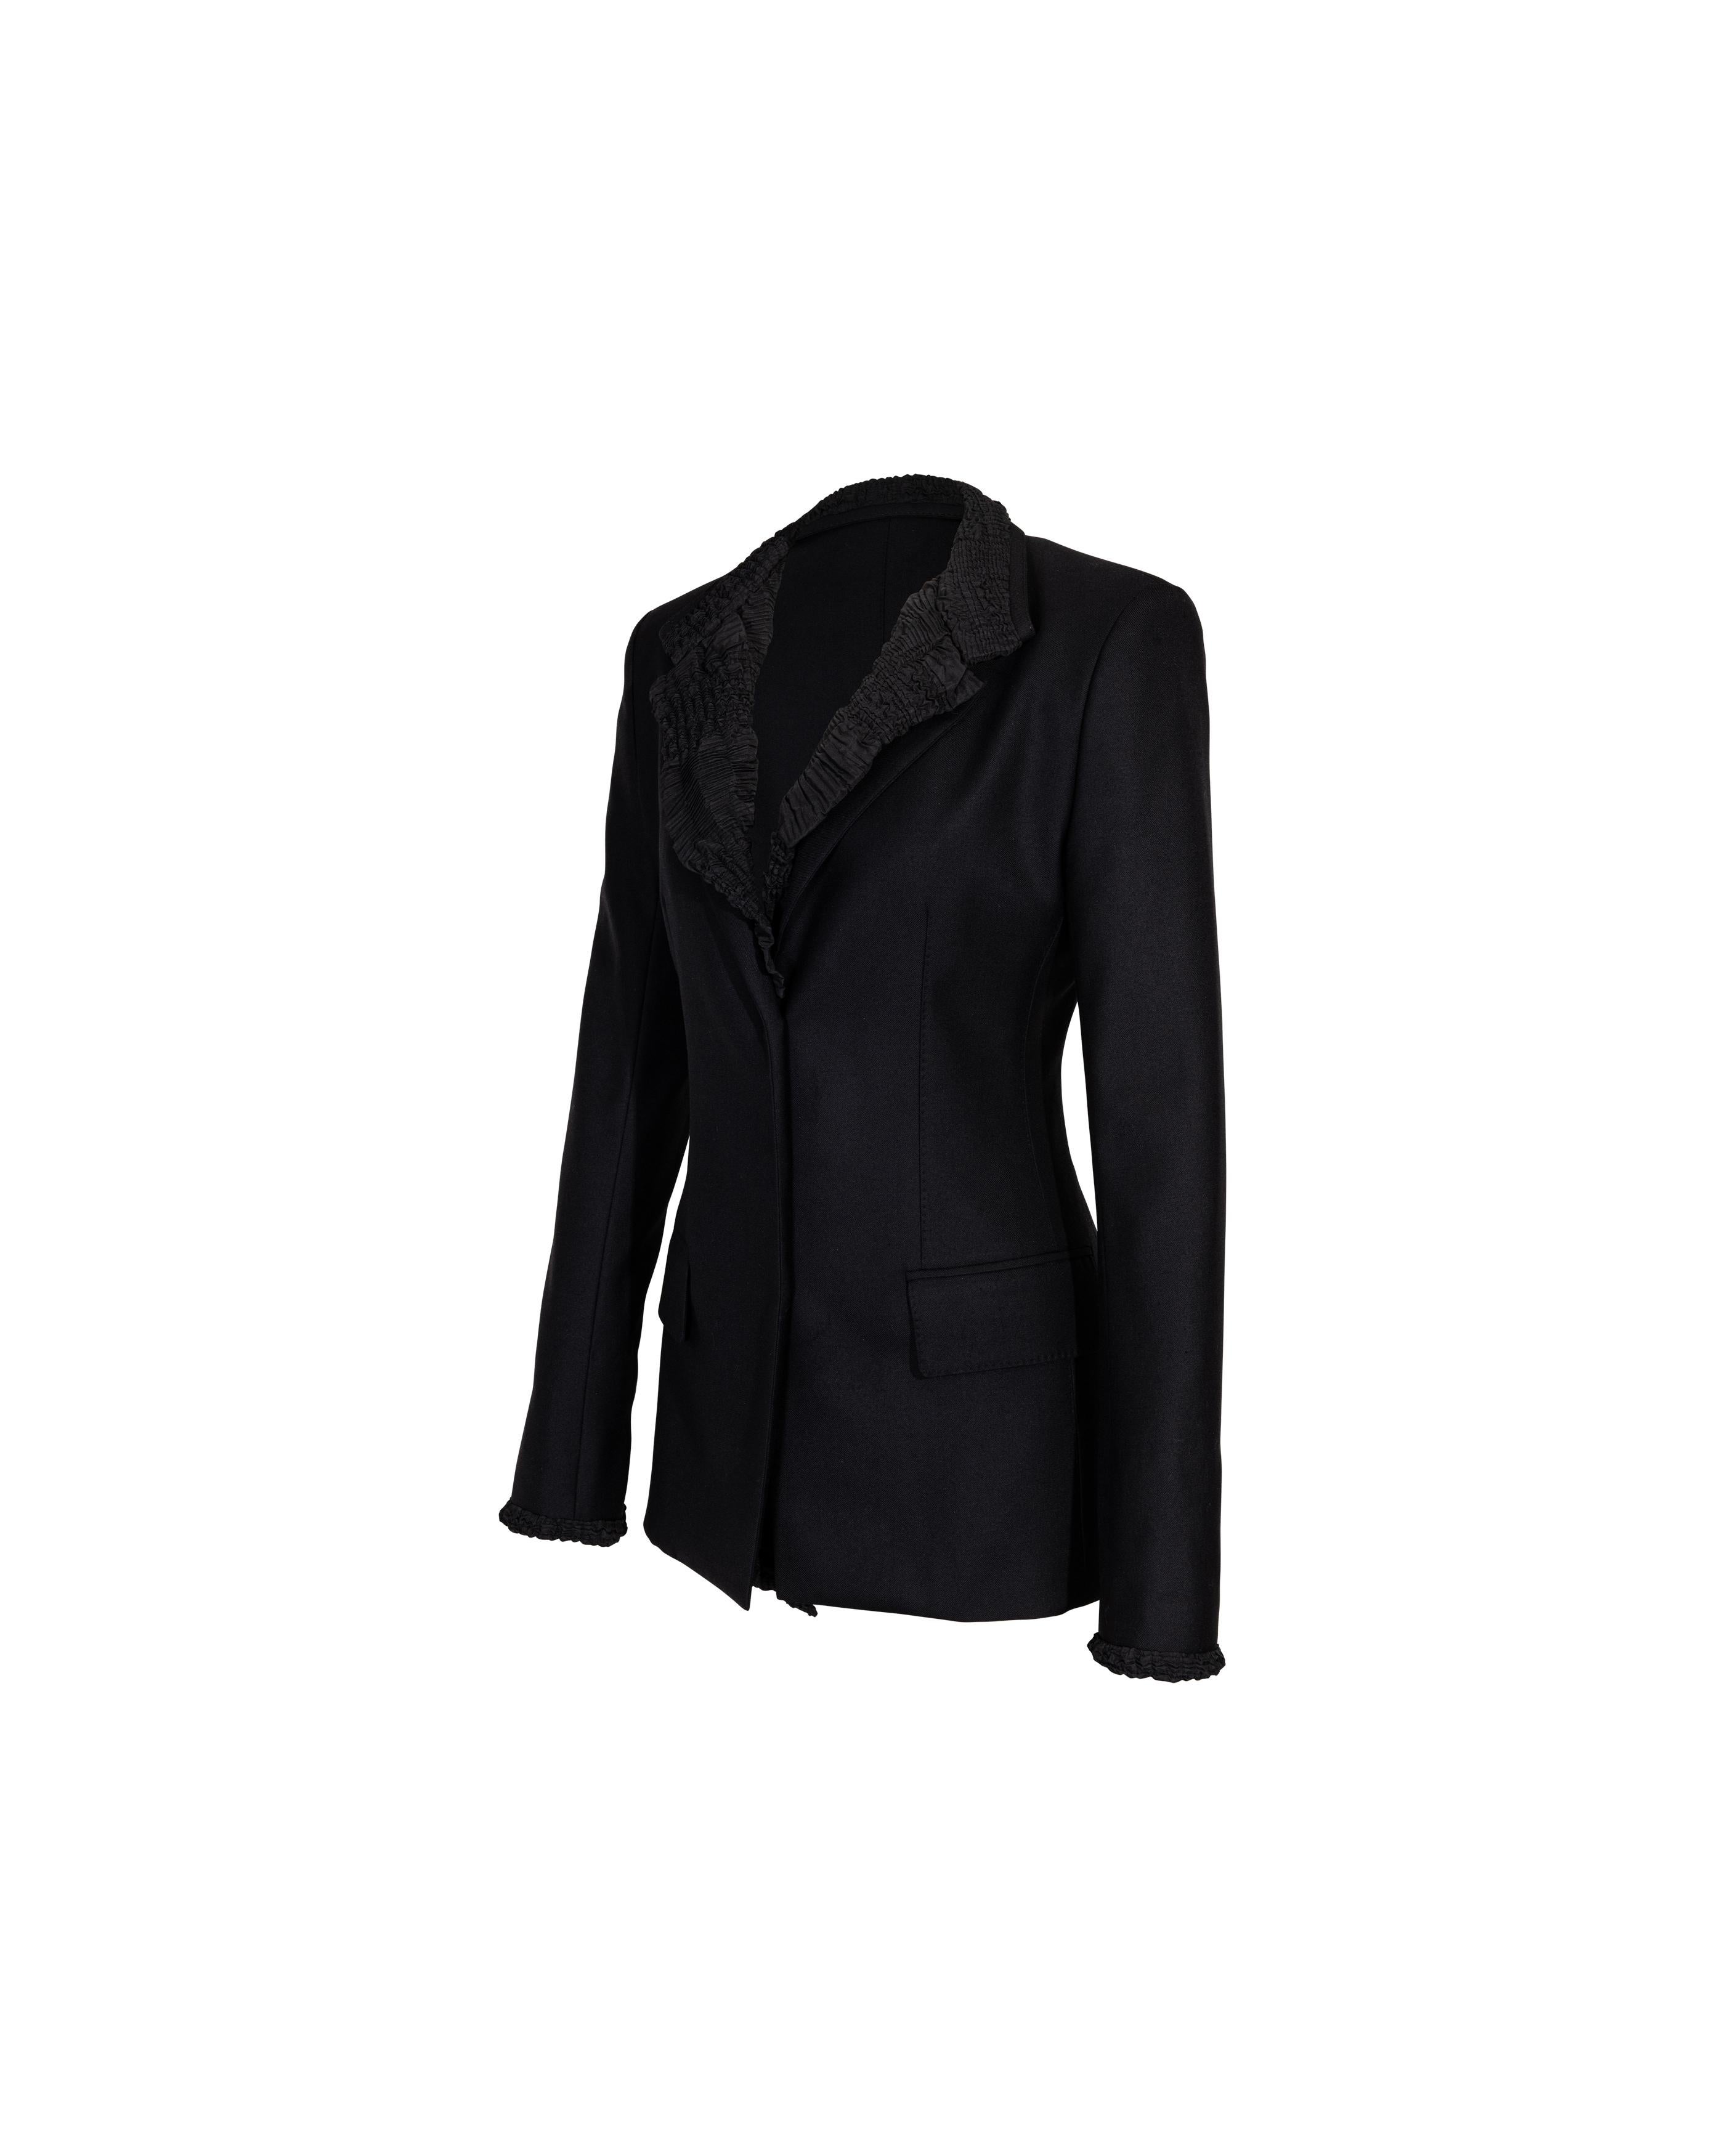 A/W 2001 Yves Saint Laurent Rive Gauche Black Crinkle Collar Blazer In Good Condition In North Hollywood, CA